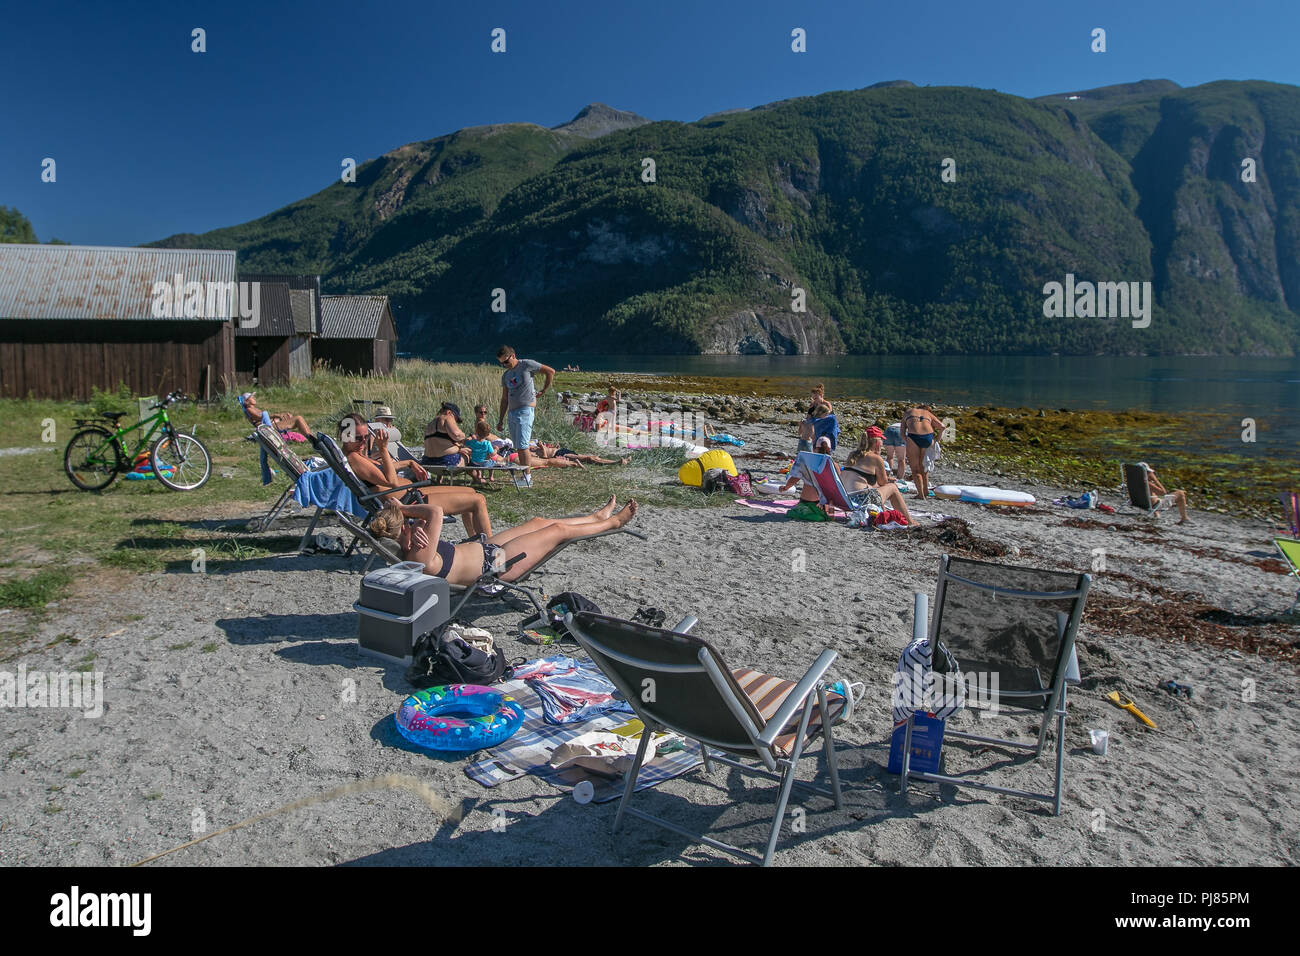 Norway, July 26, 2018: People are sunbathing on a fjord beach on a hot summer day. Stock Photo